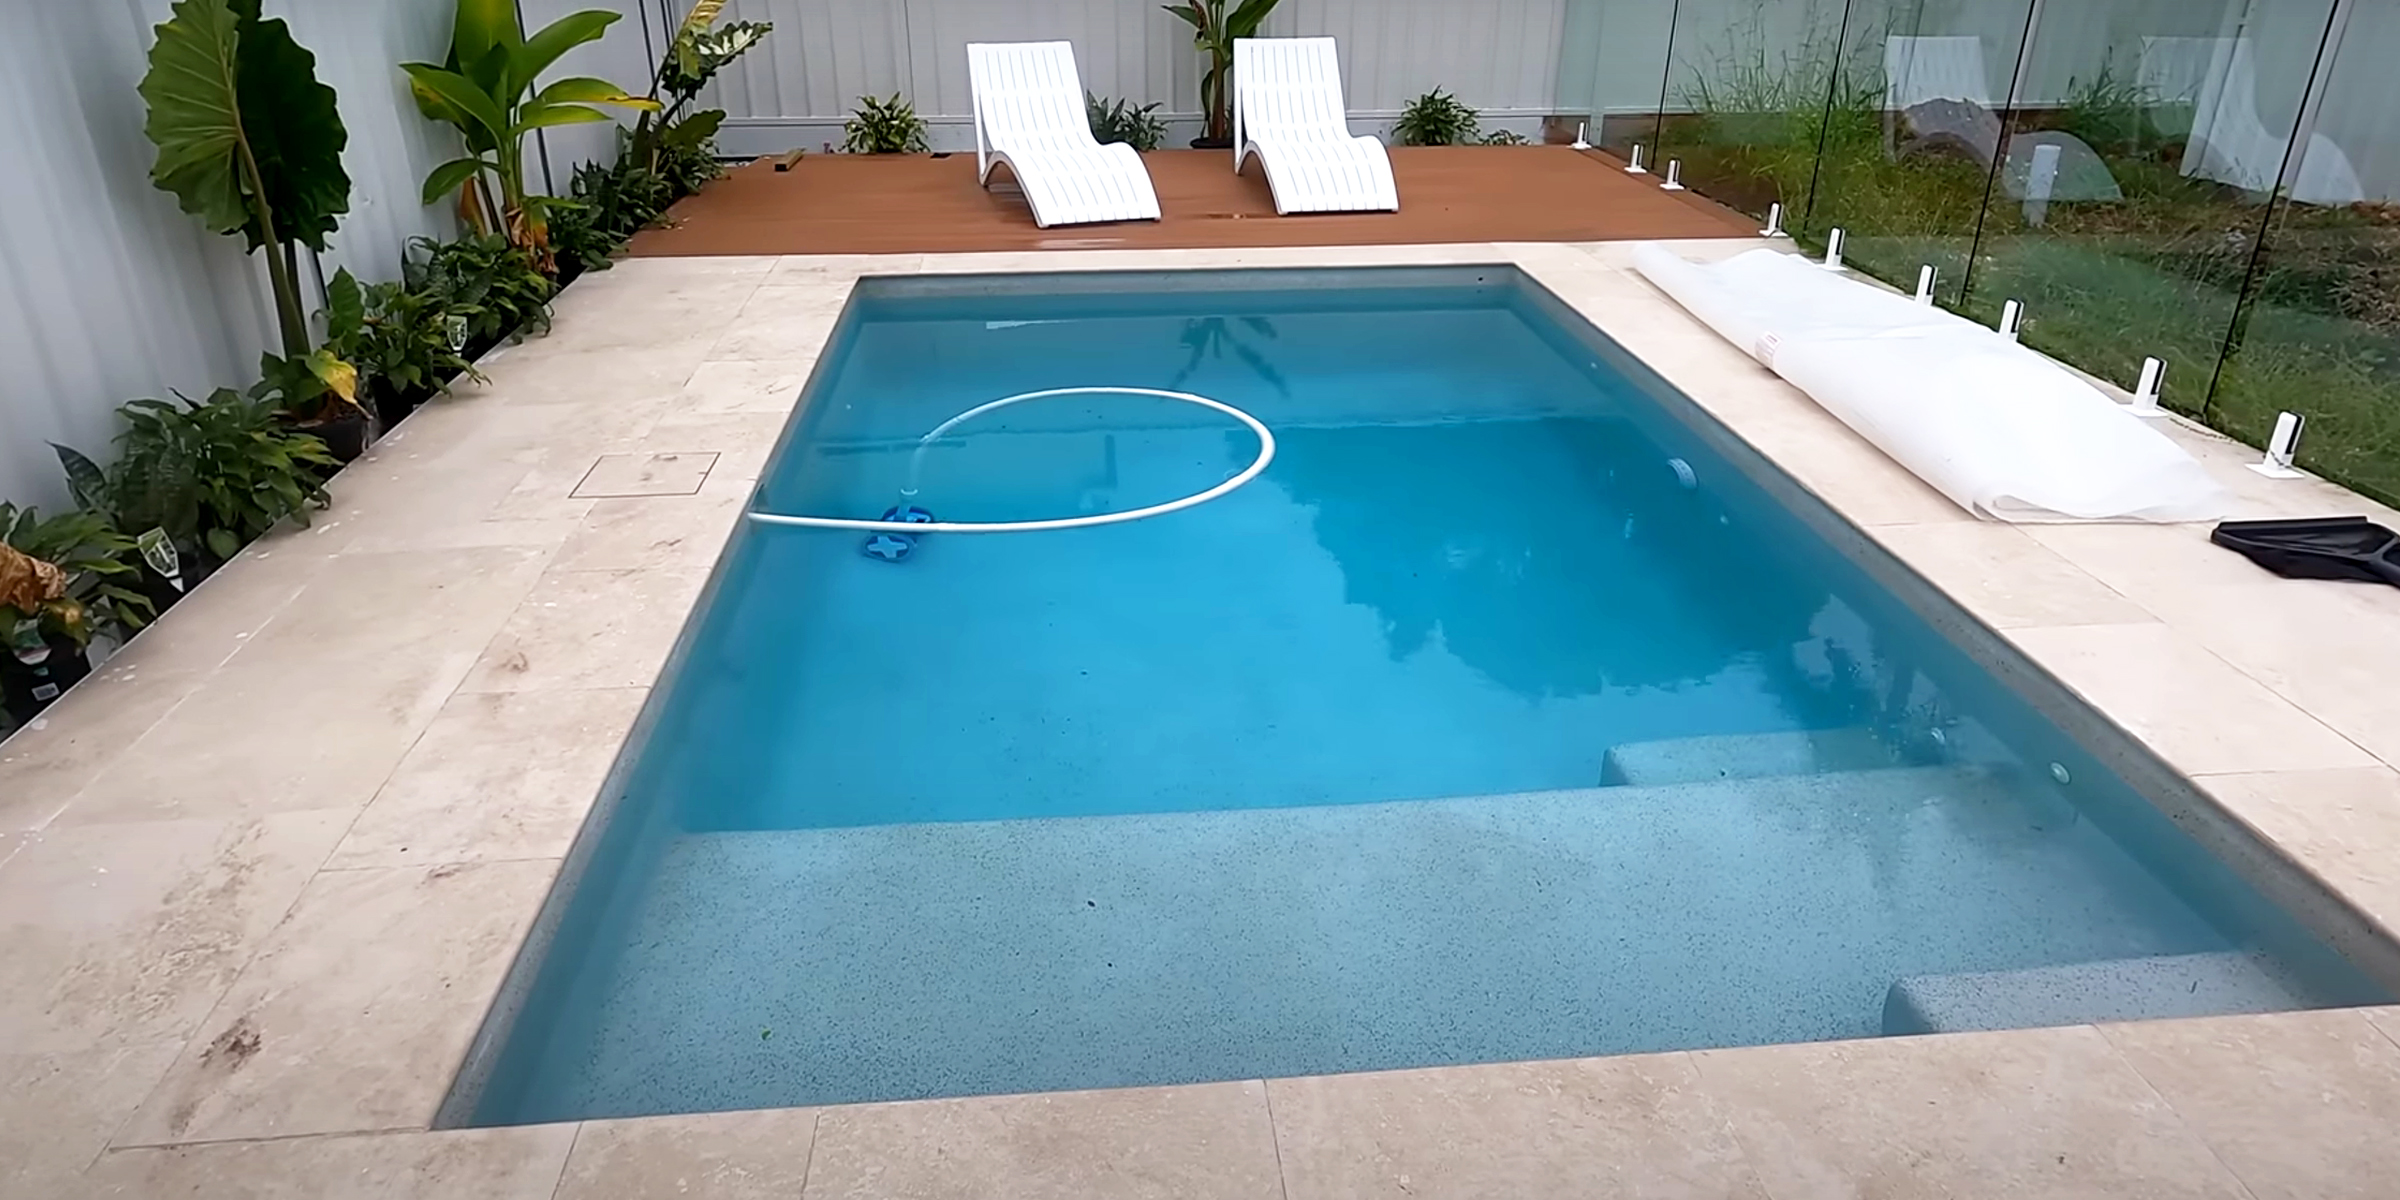 Cocktail pool | Source: YouTube/@AddictedtoTools